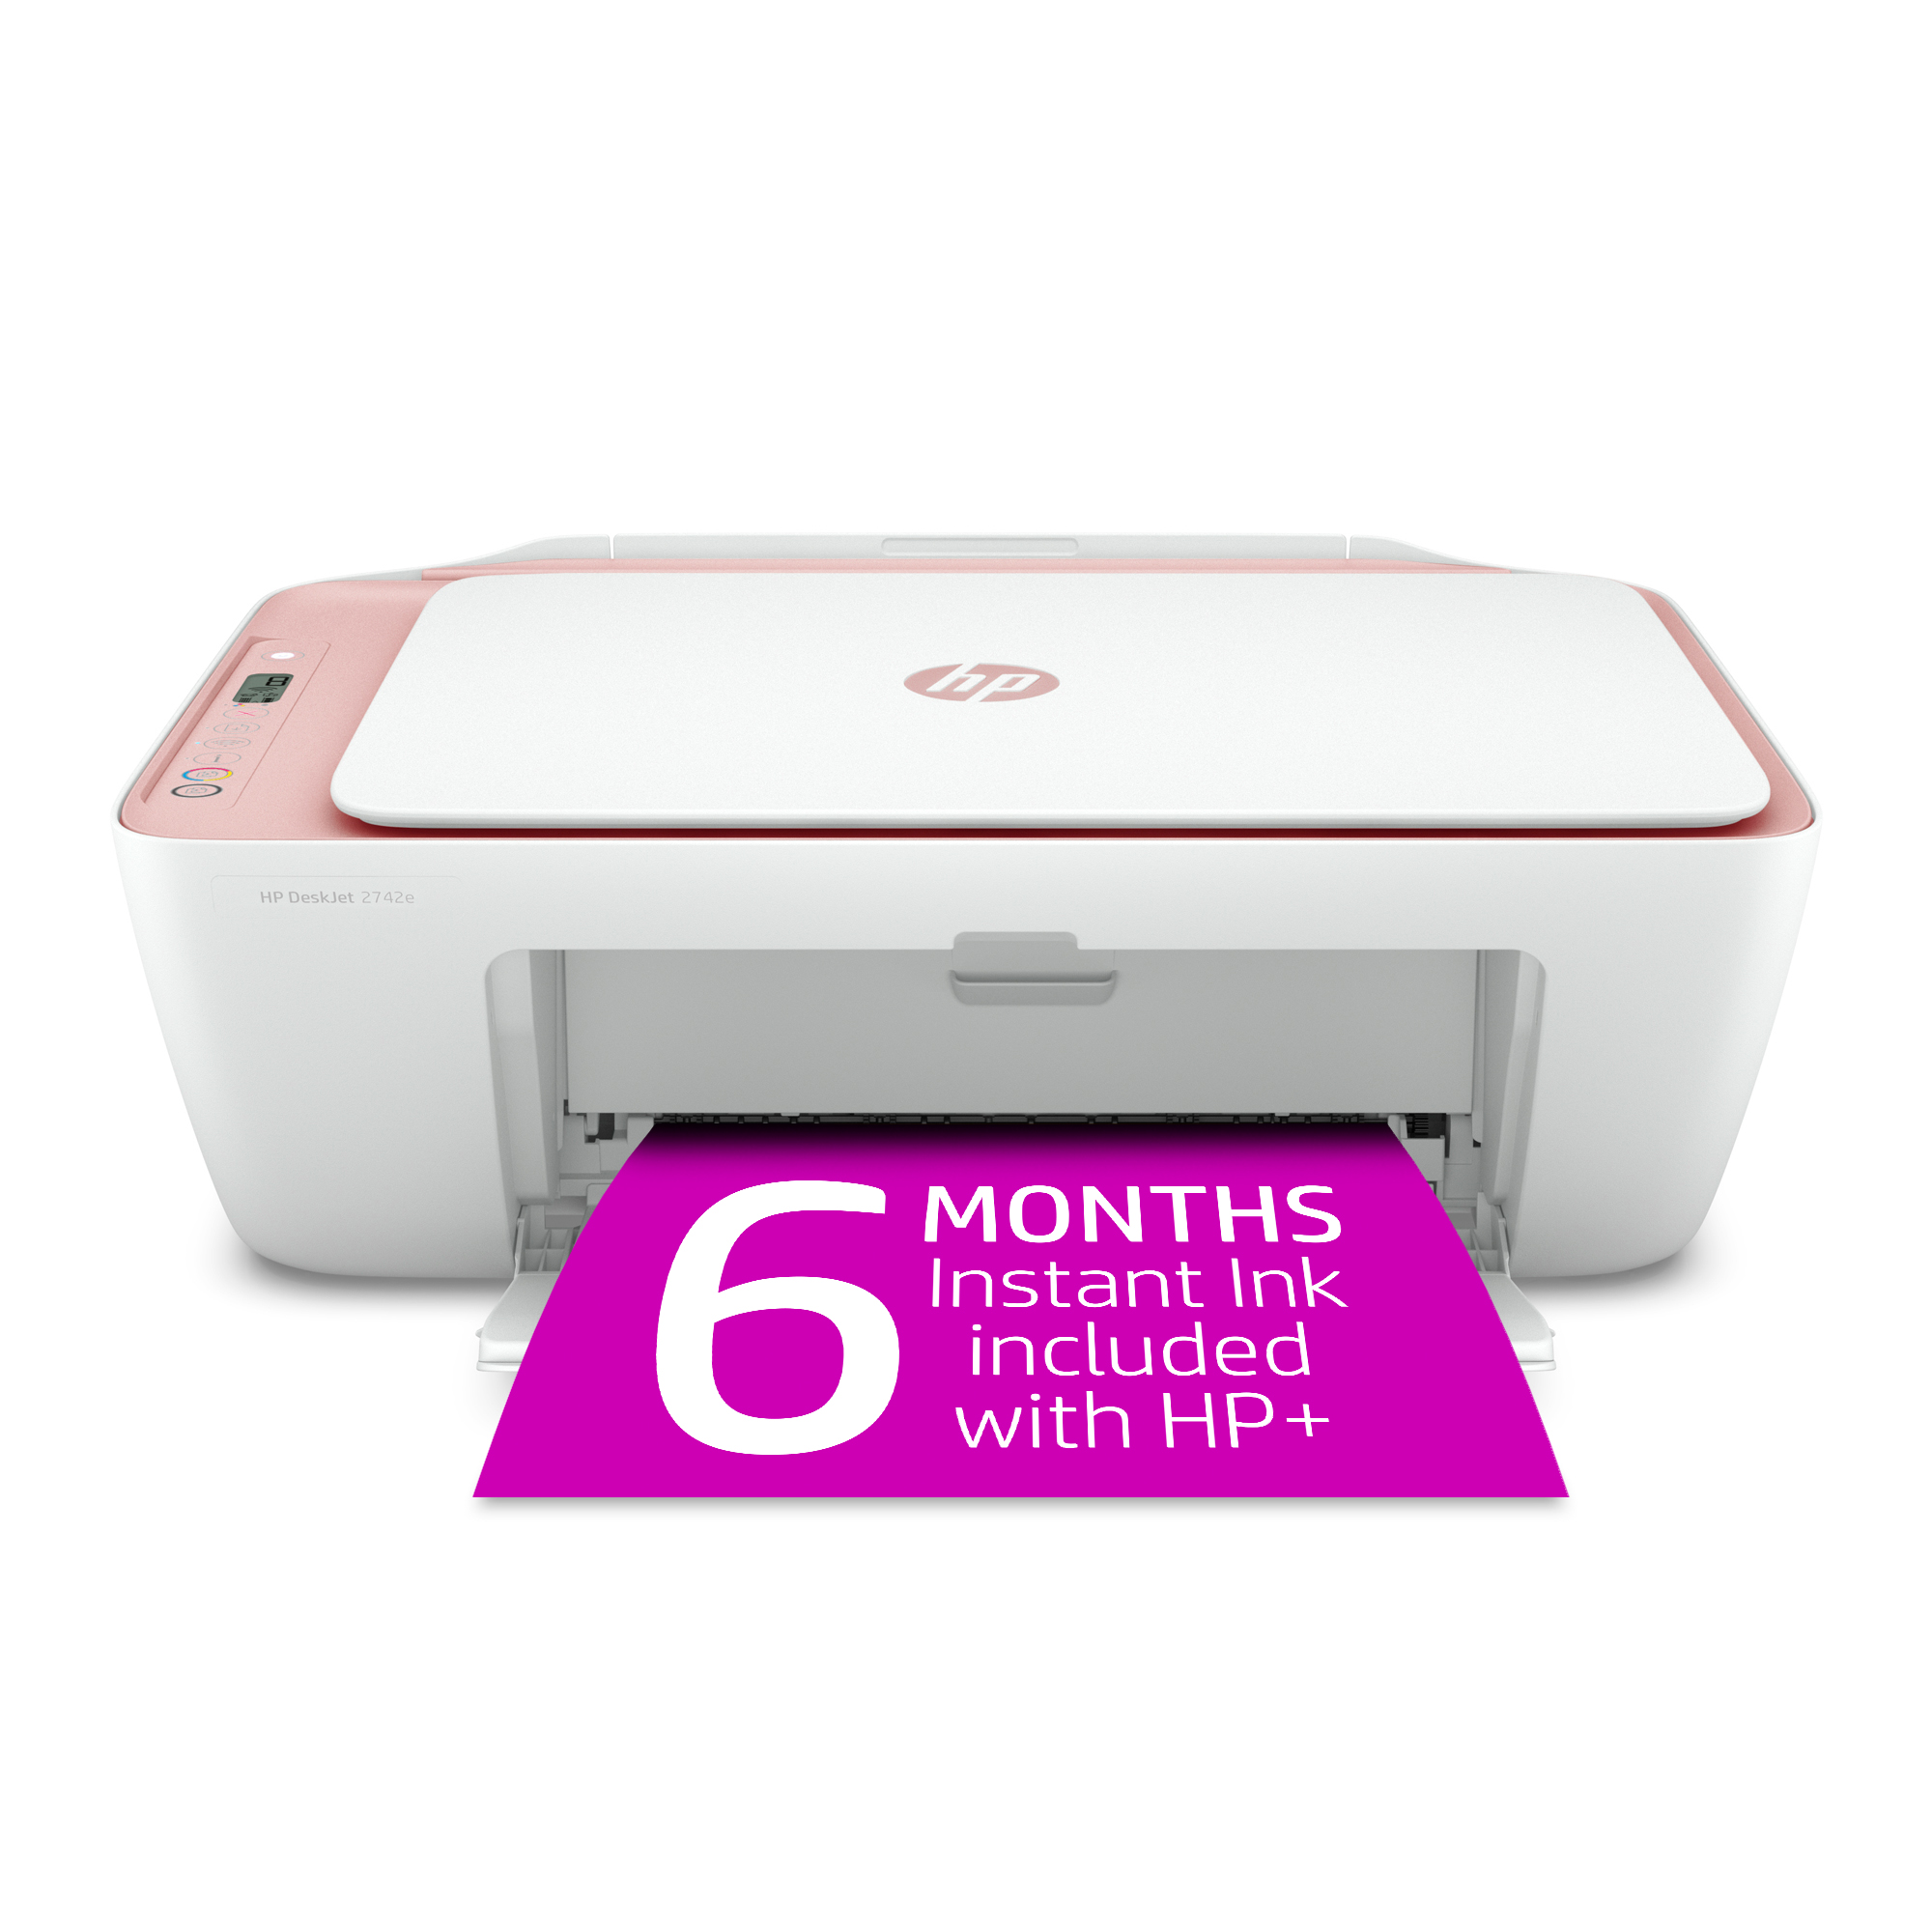 HP DeskJet 2742e Wireless Color All-in-One Inkjet Printer (Himalayan Pink) with 6 months Instant Ink Included with HP+ - image 1 of 9